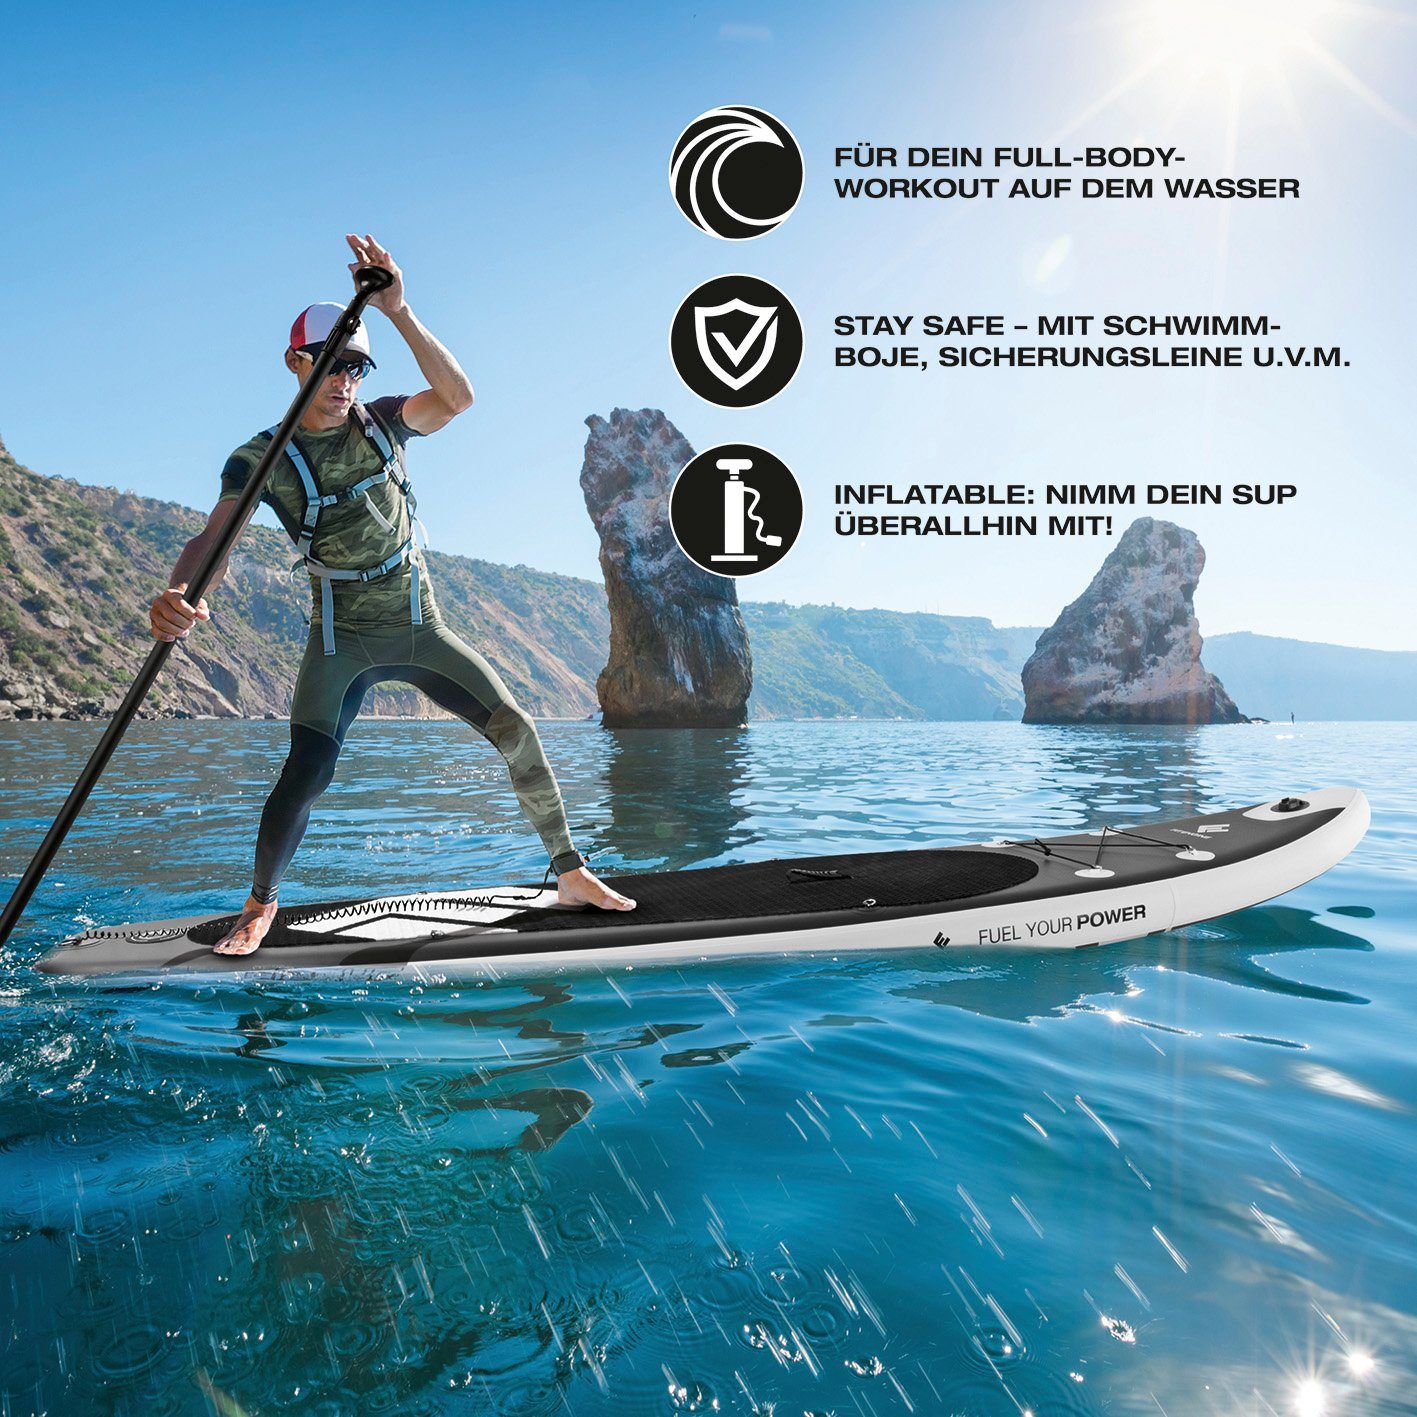 SUP-Board FitEngine Stand 365cm Inflatable 160kg extra Paddle, Up aufblasbar Groß stabil